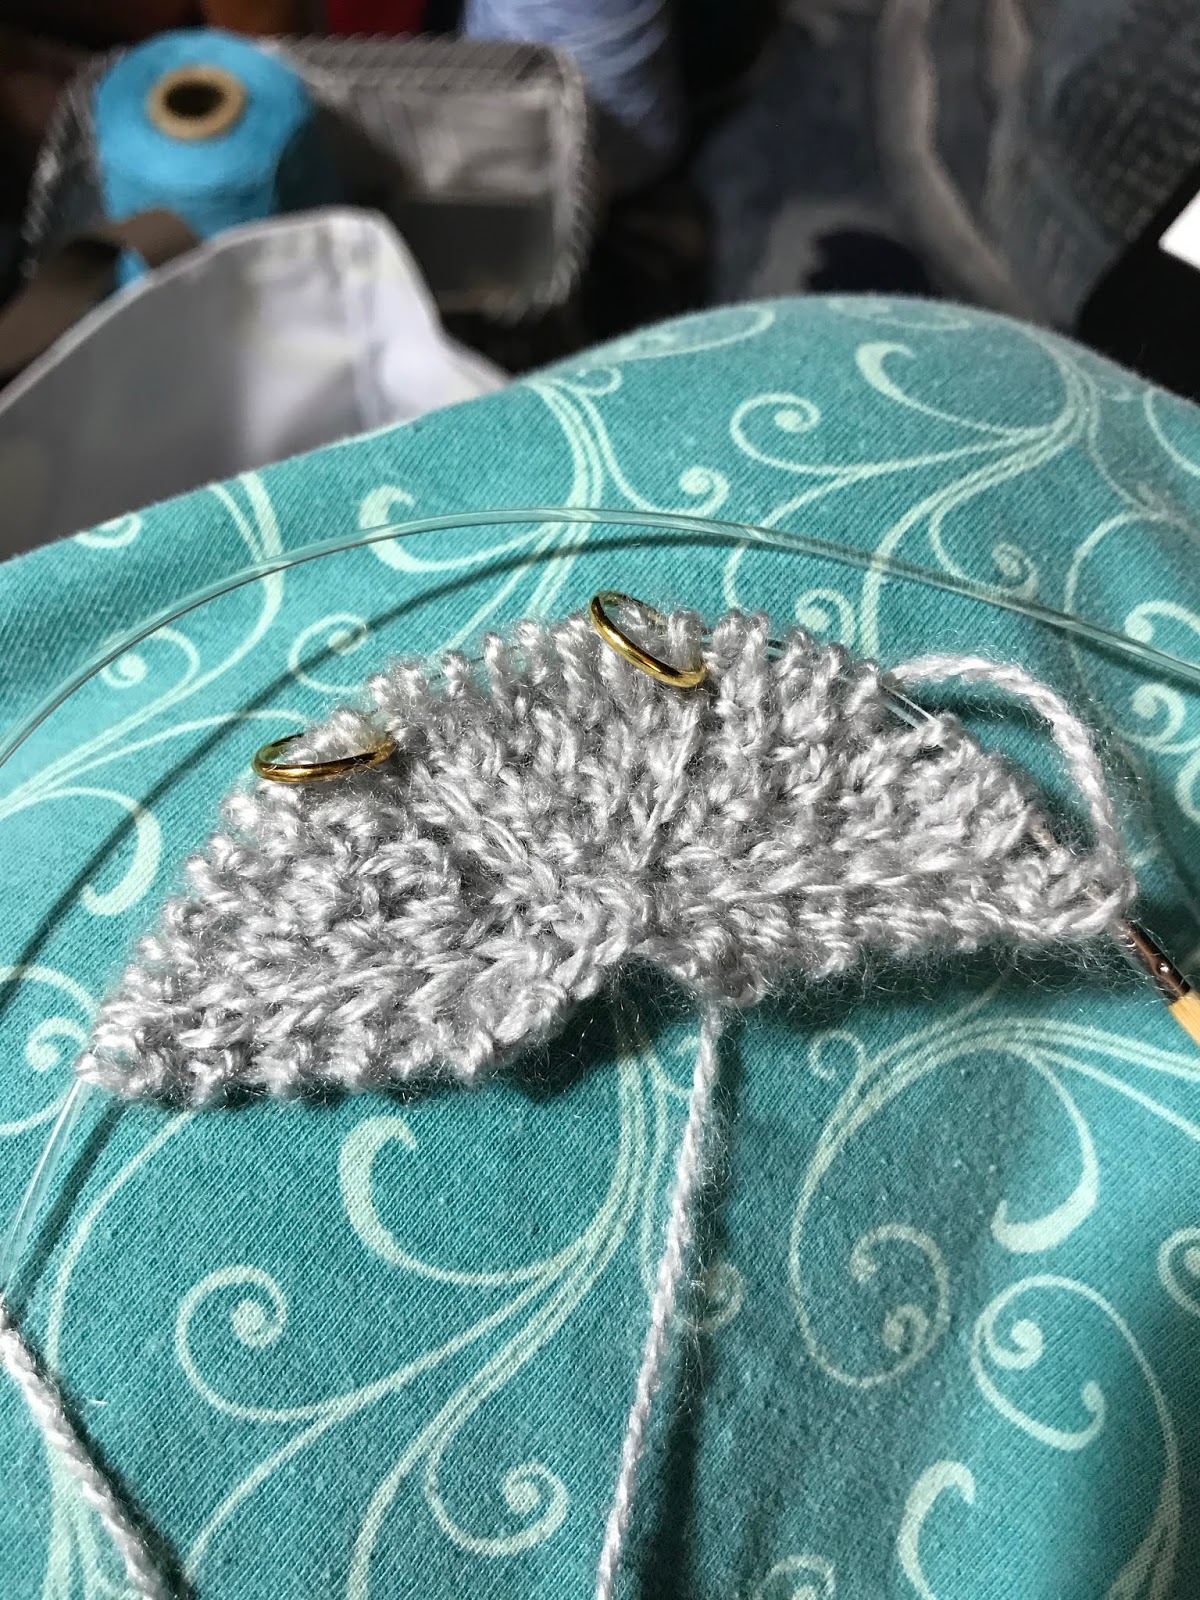 Yarn Thoughts: Yarn Bee 44th Street (and what I made)